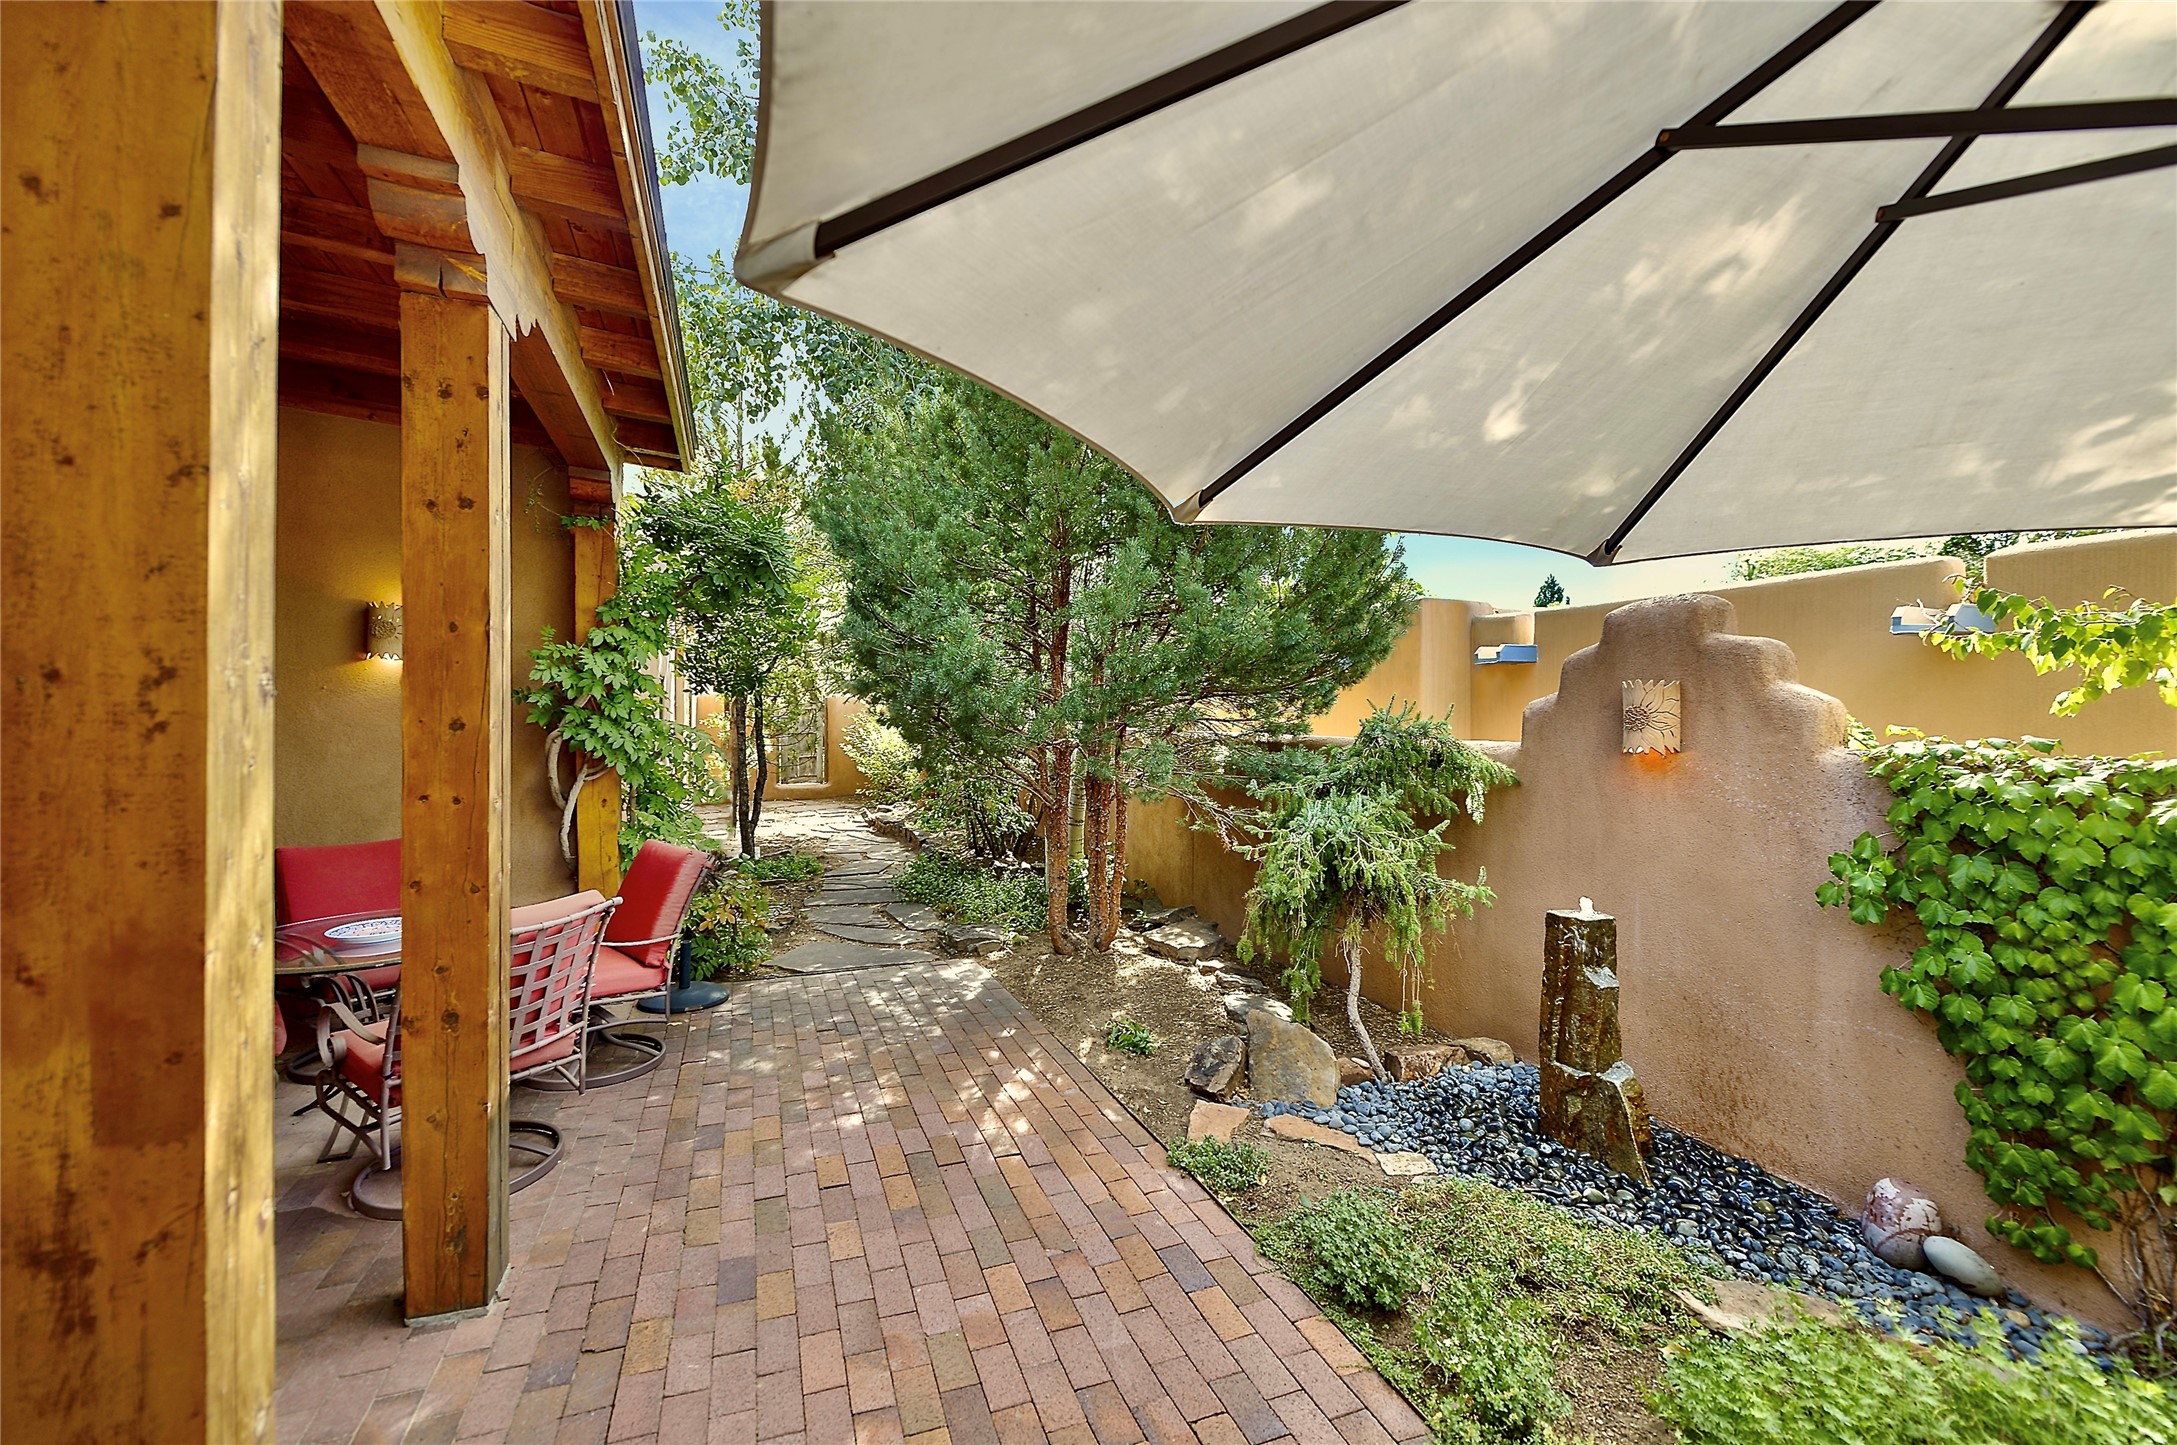 751 Acequia Madre 3, Santa Fe, New Mexico 87505, 2 Bedrooms Bedrooms, ,2 BathroomsBathrooms,Residential,For Sale,751 Acequia Madre 3,202233329